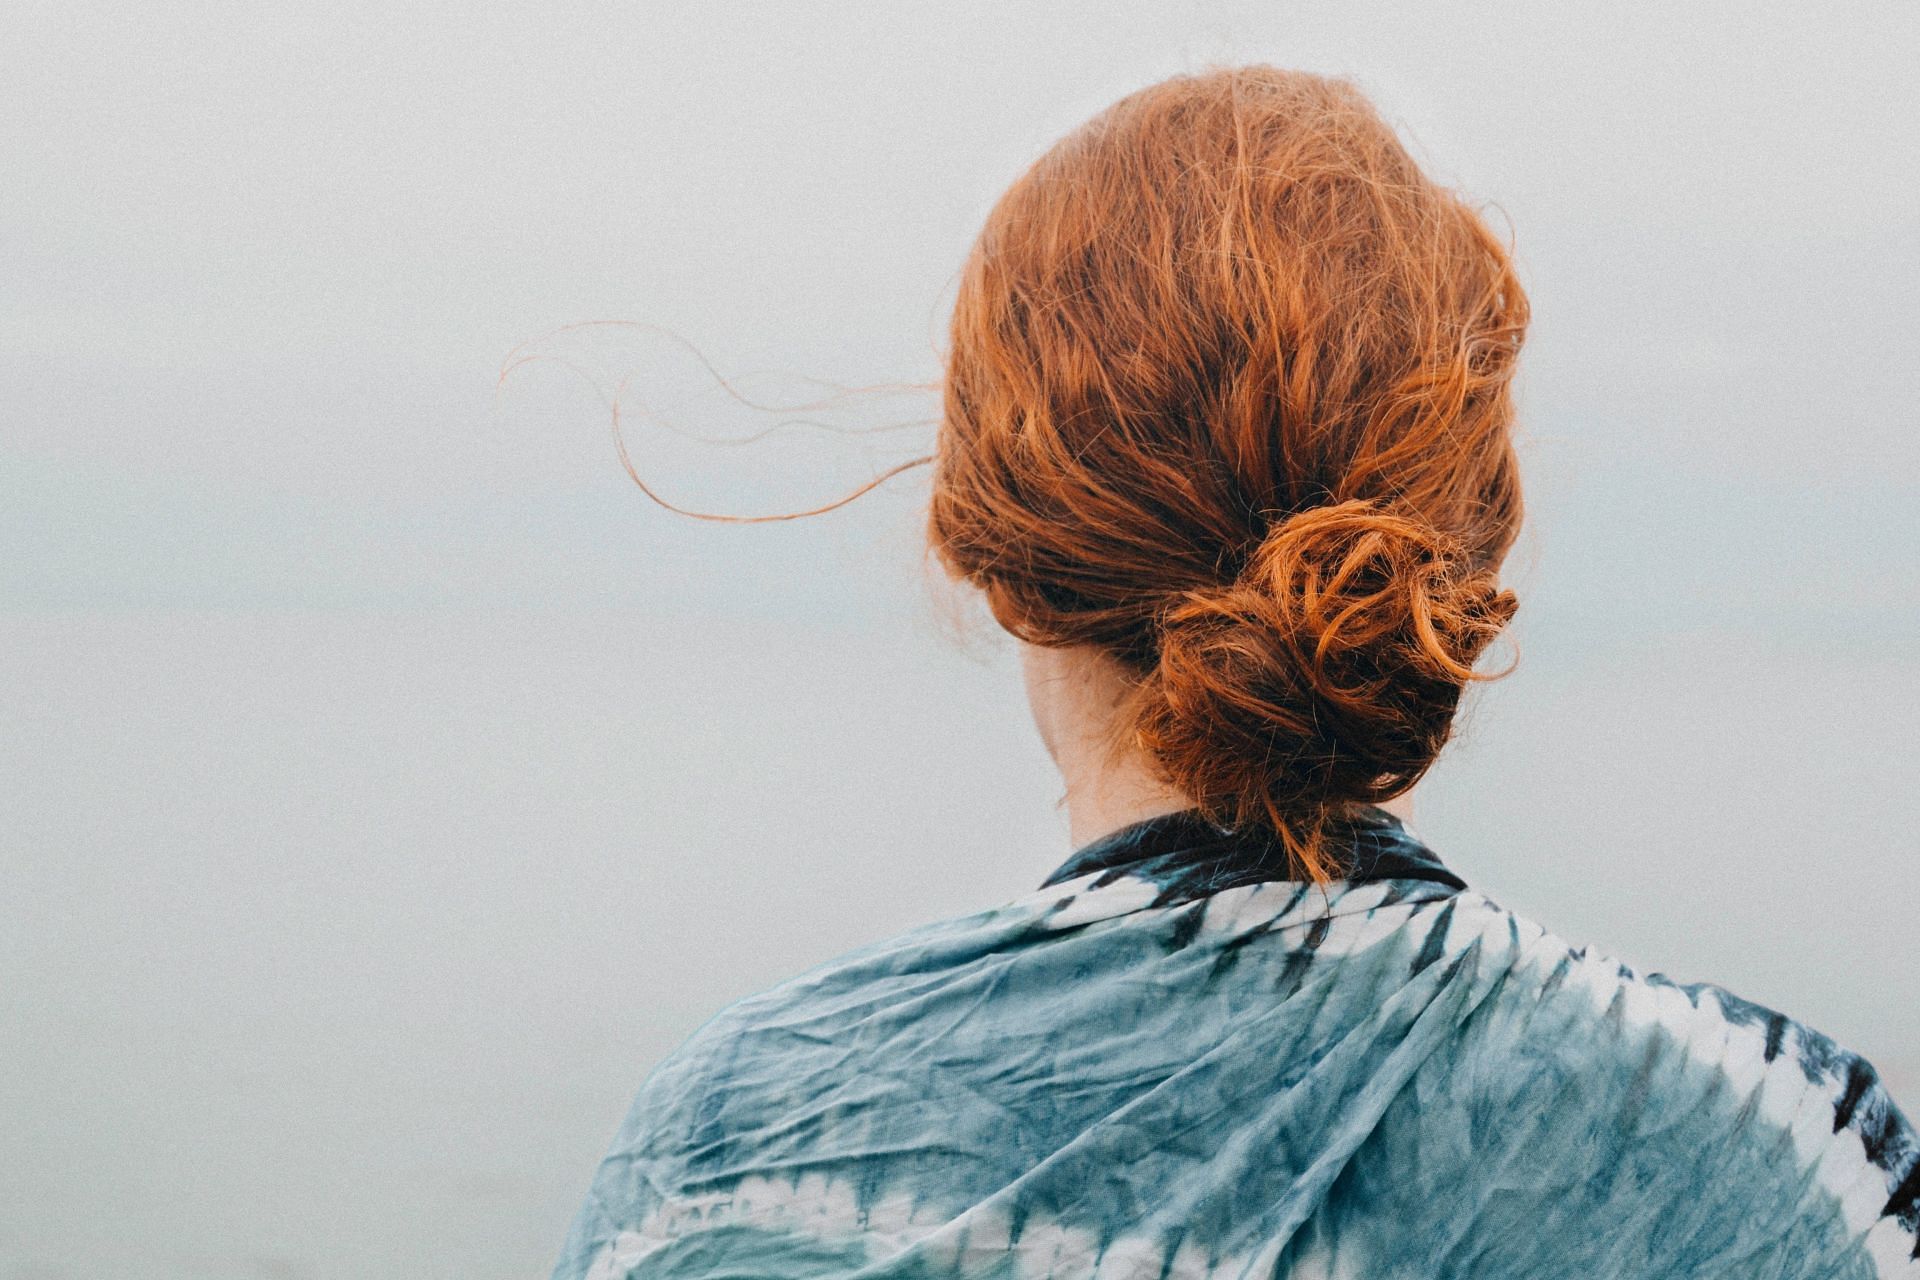 Spun glass hair can be annoying to deal with. (Image via Unsplash/ Tyler McRobert)